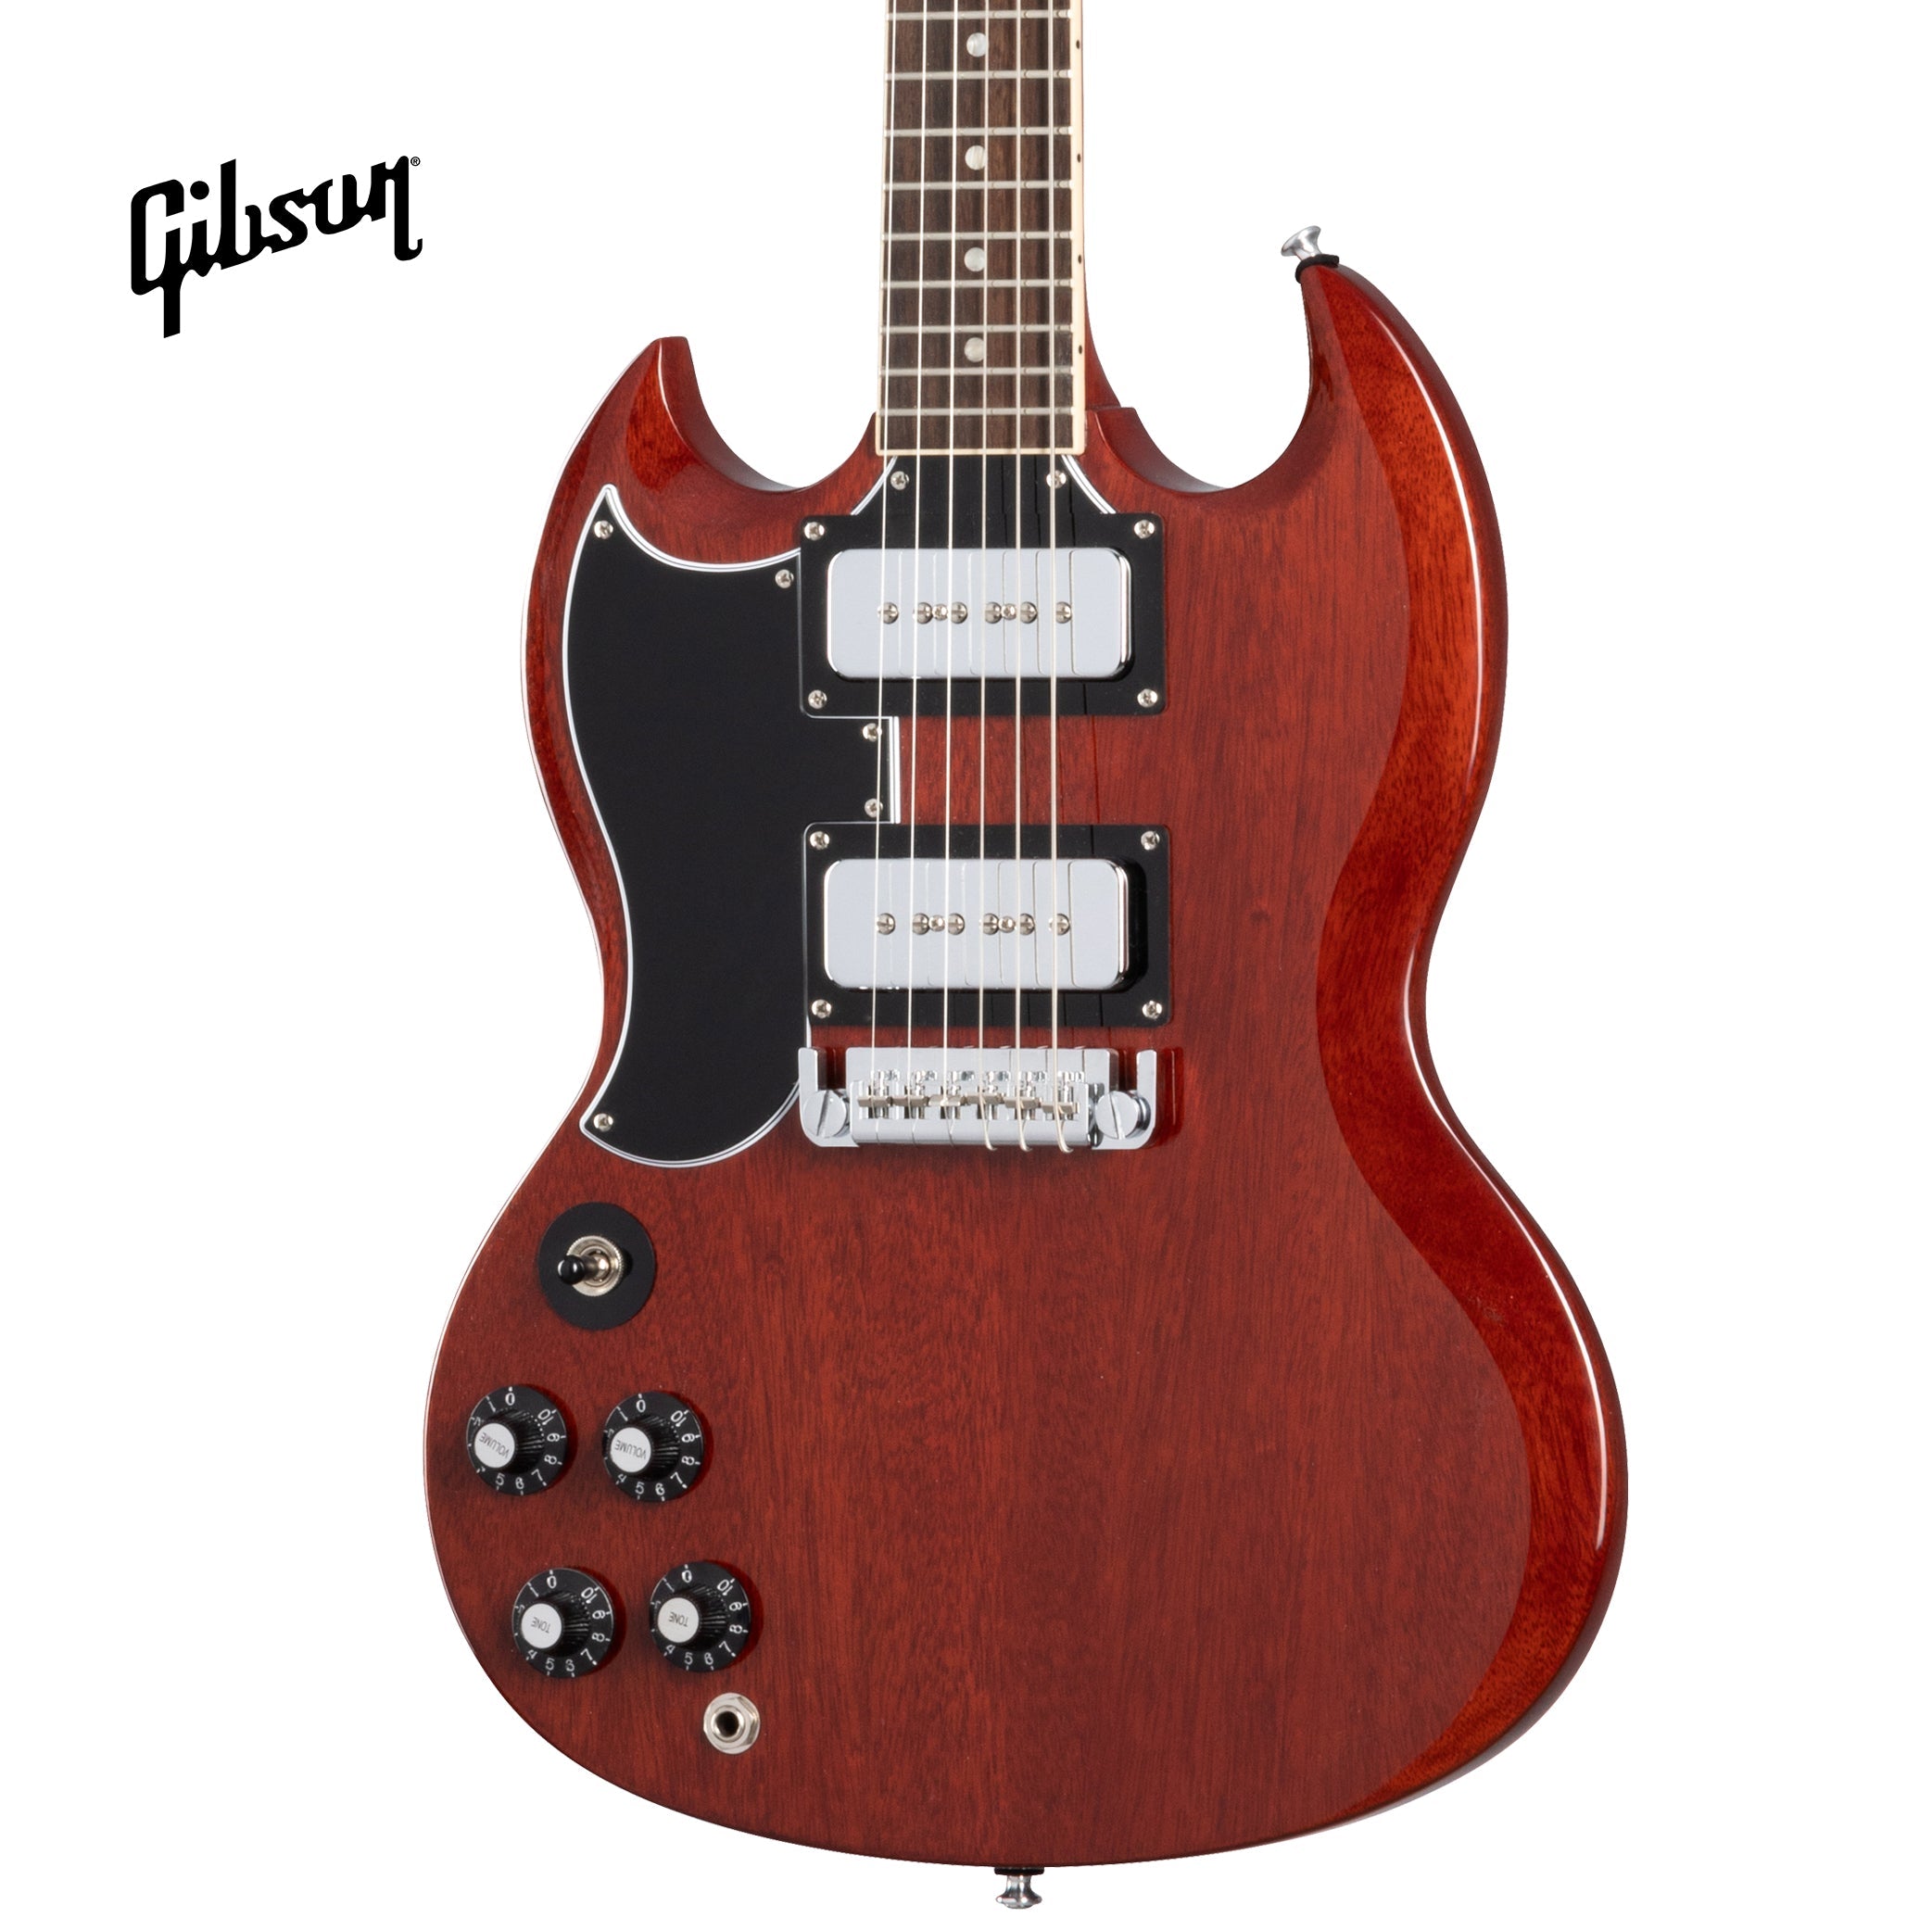 GIBSON TONY IOMMI "MONKEY" SG SPECIAL LEFT-HANDED ELECTRIC GUITAR - VINTAGE CHERRY